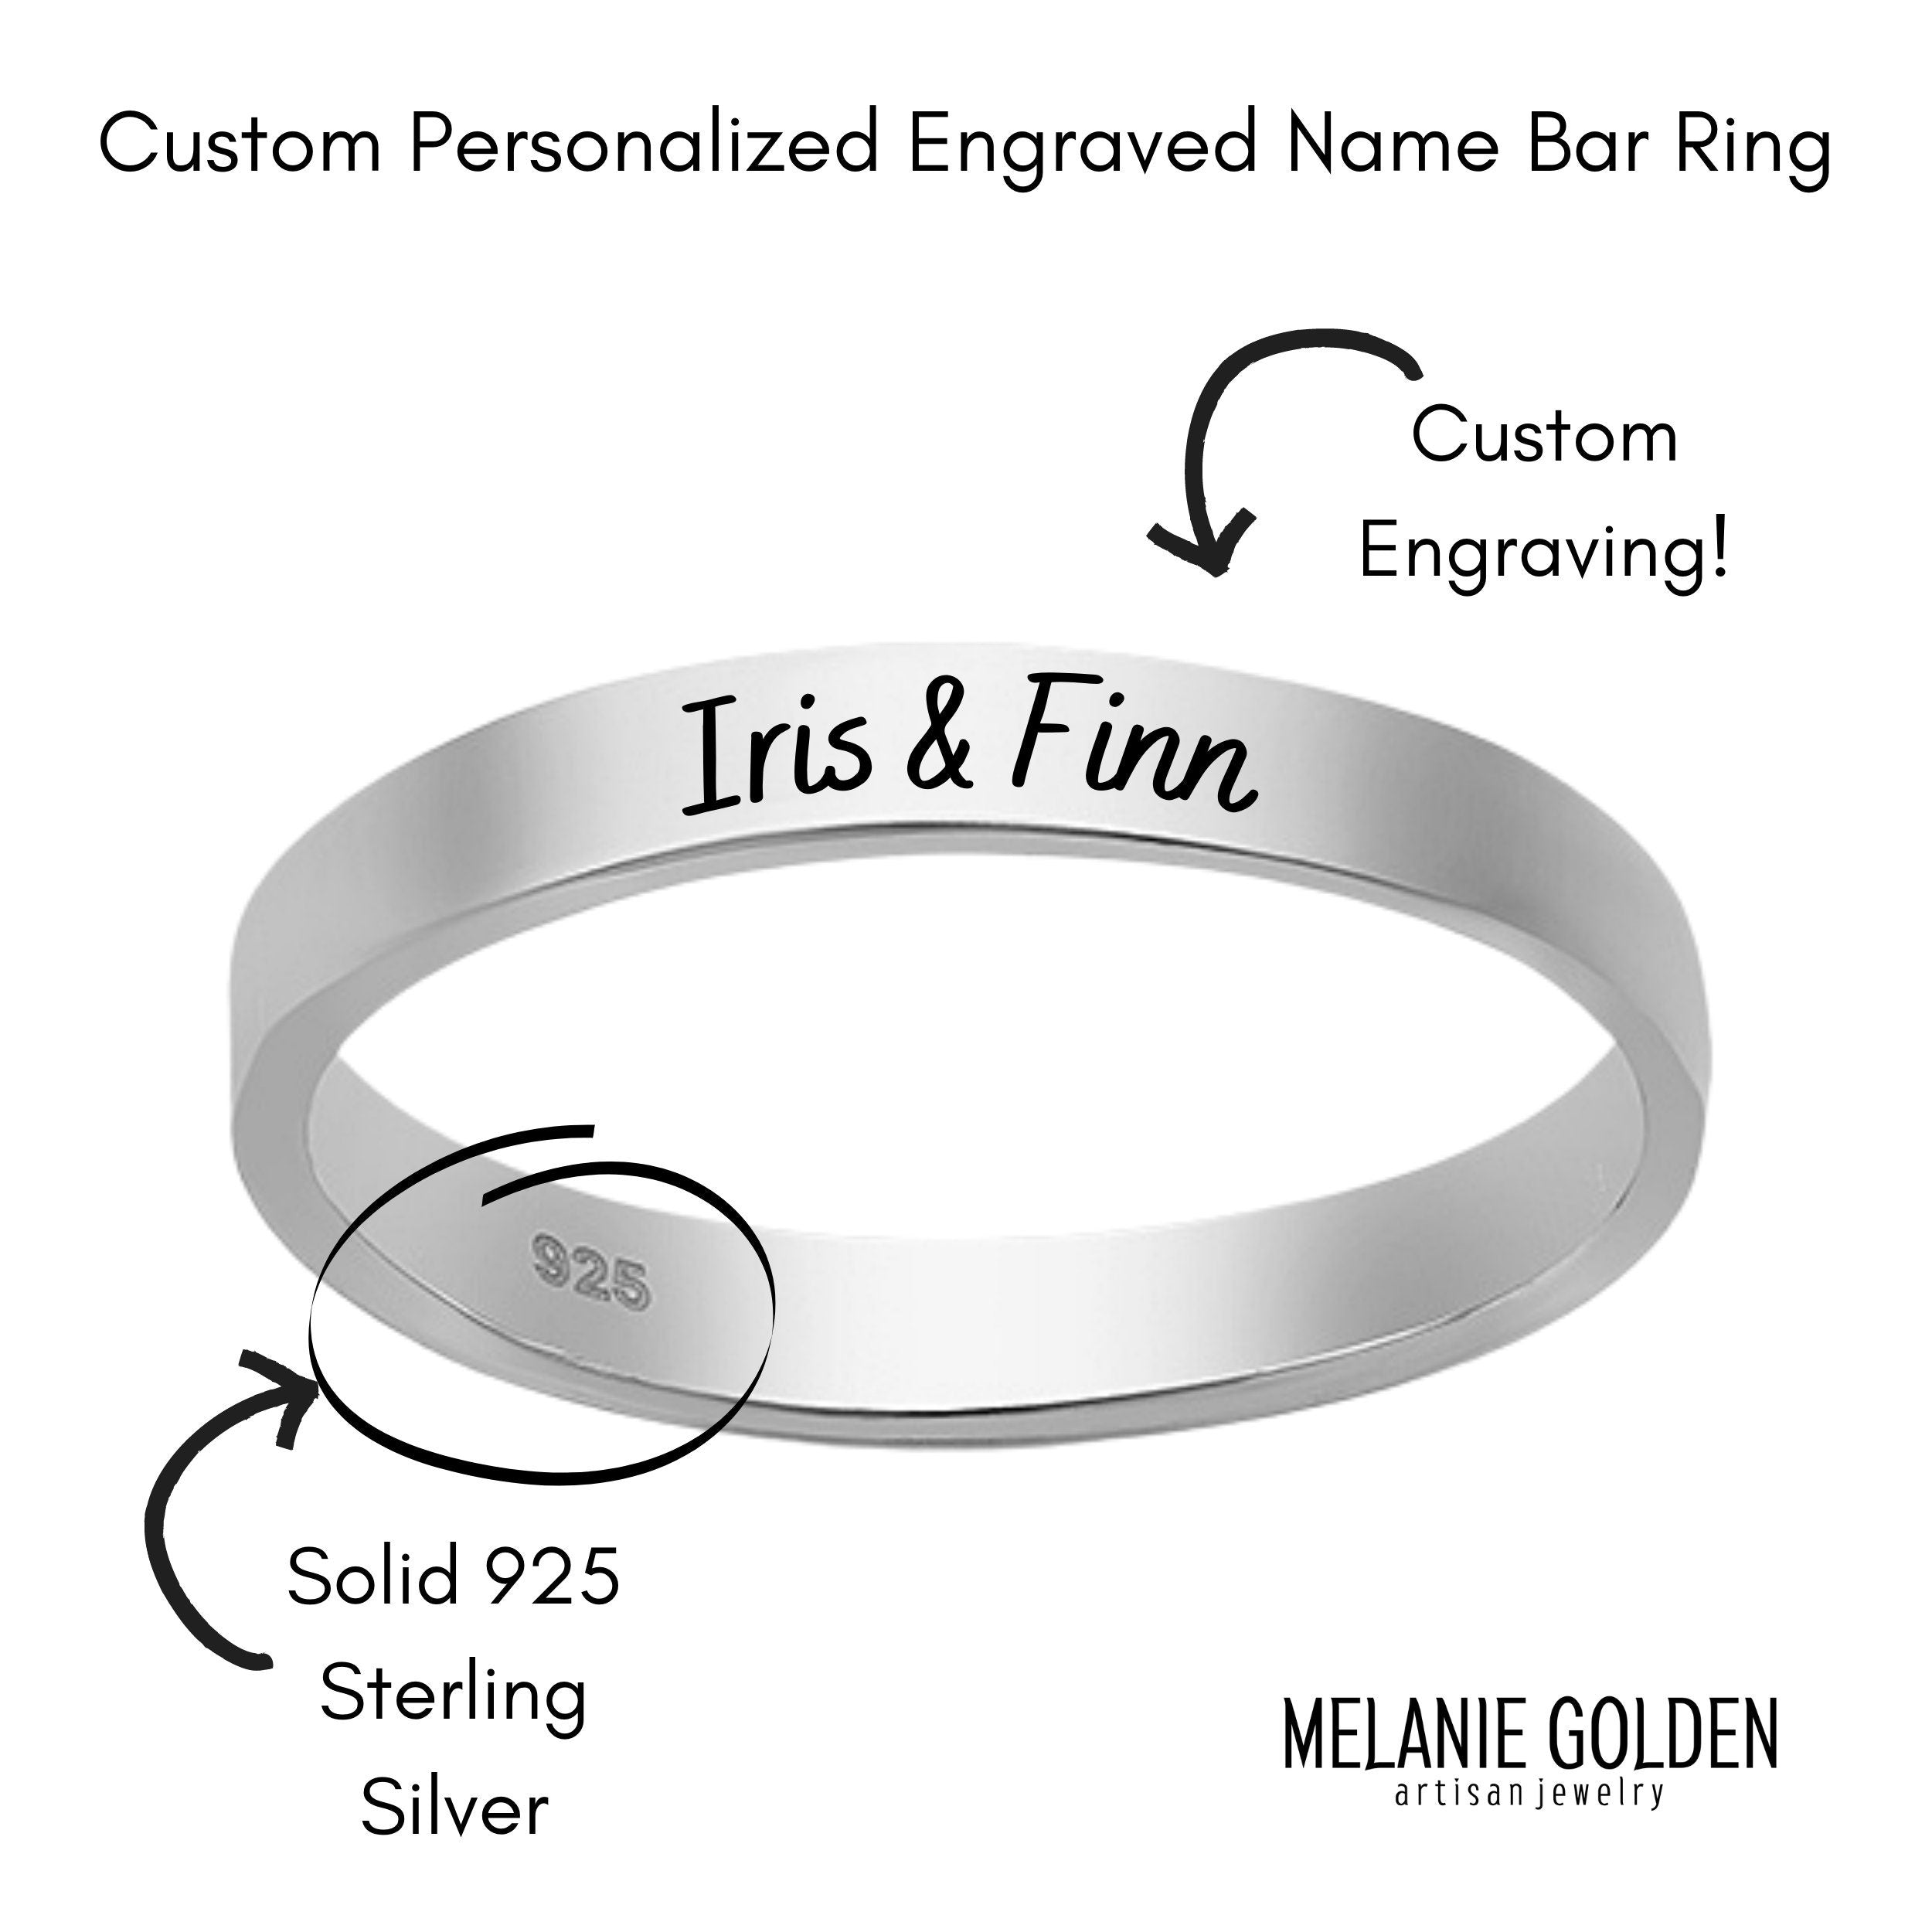 Personalized Name Ring Band - Melanie Golden Jewelry - engraved, personalized, personalized jewelry, ring bands, rings, stacking rings